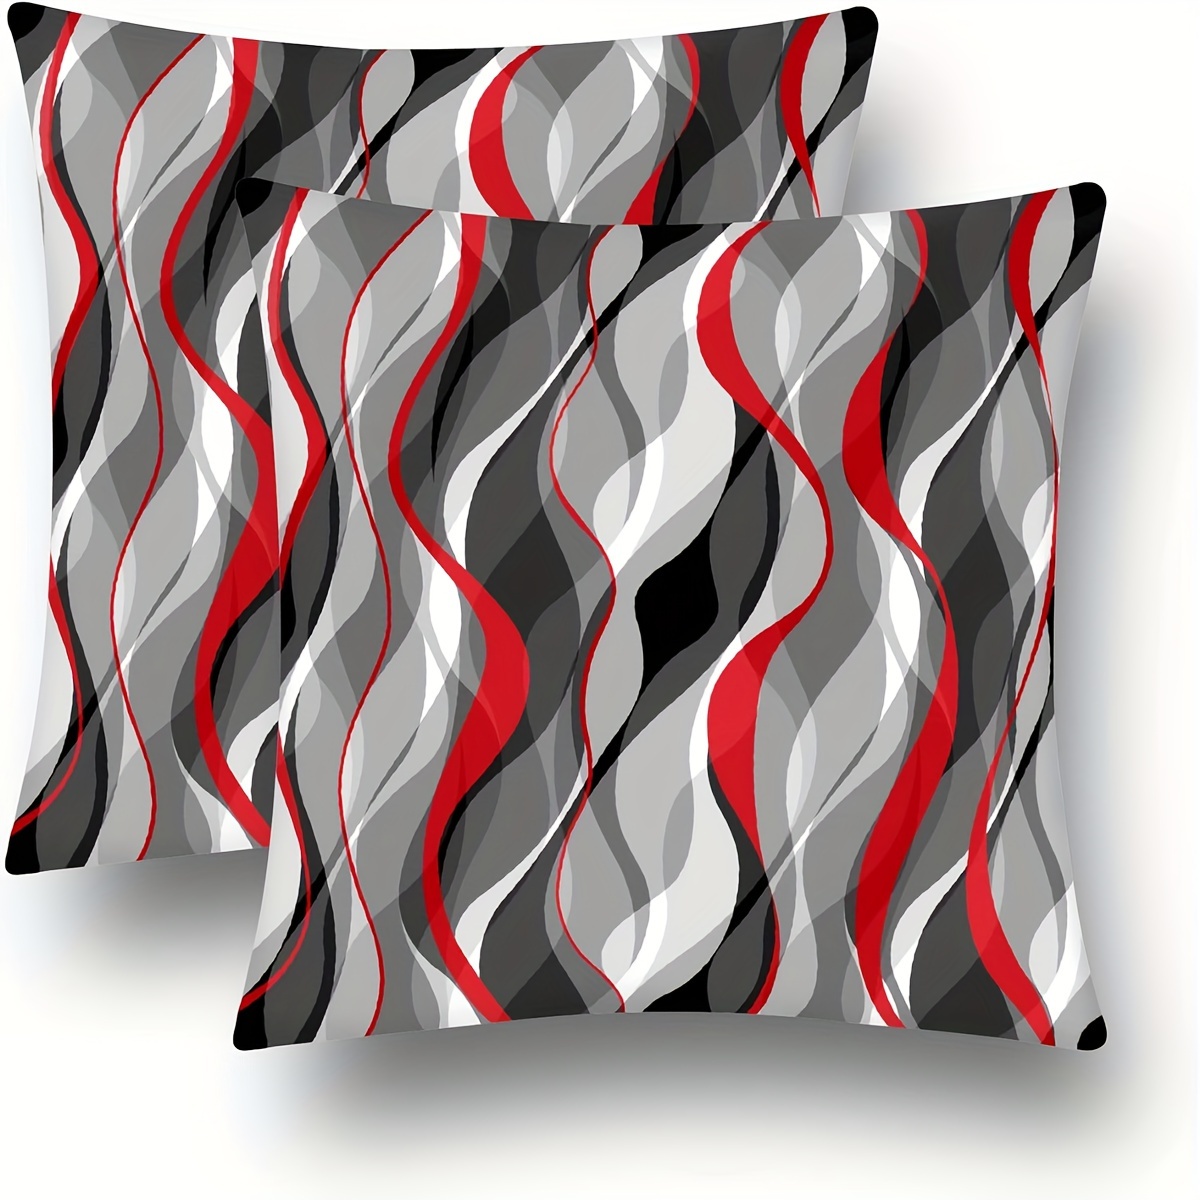 

2pcs, Modern Geometric Pillow Covers, Black, Red & Gray Abstract Art Cushion Cases, Contemporary Style, 18x18 Inches, Home Sofa Decor, Outdoor Pillow Shams (pillow Inserts Not Included)